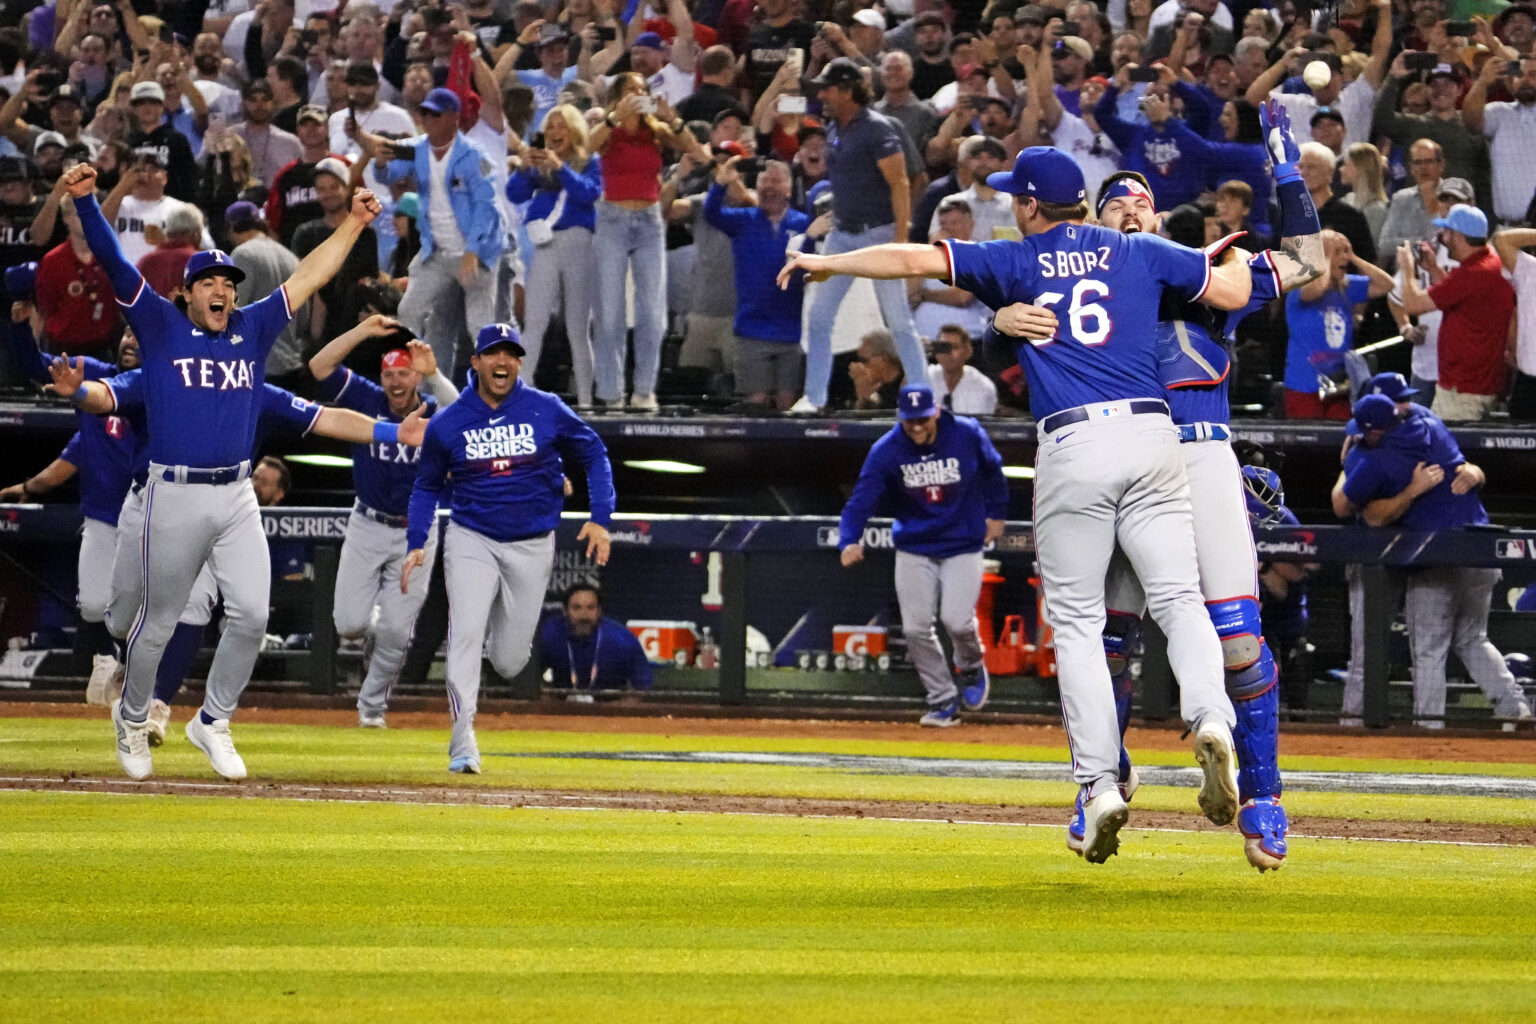 The Texas Rangers Are The World Series Champions